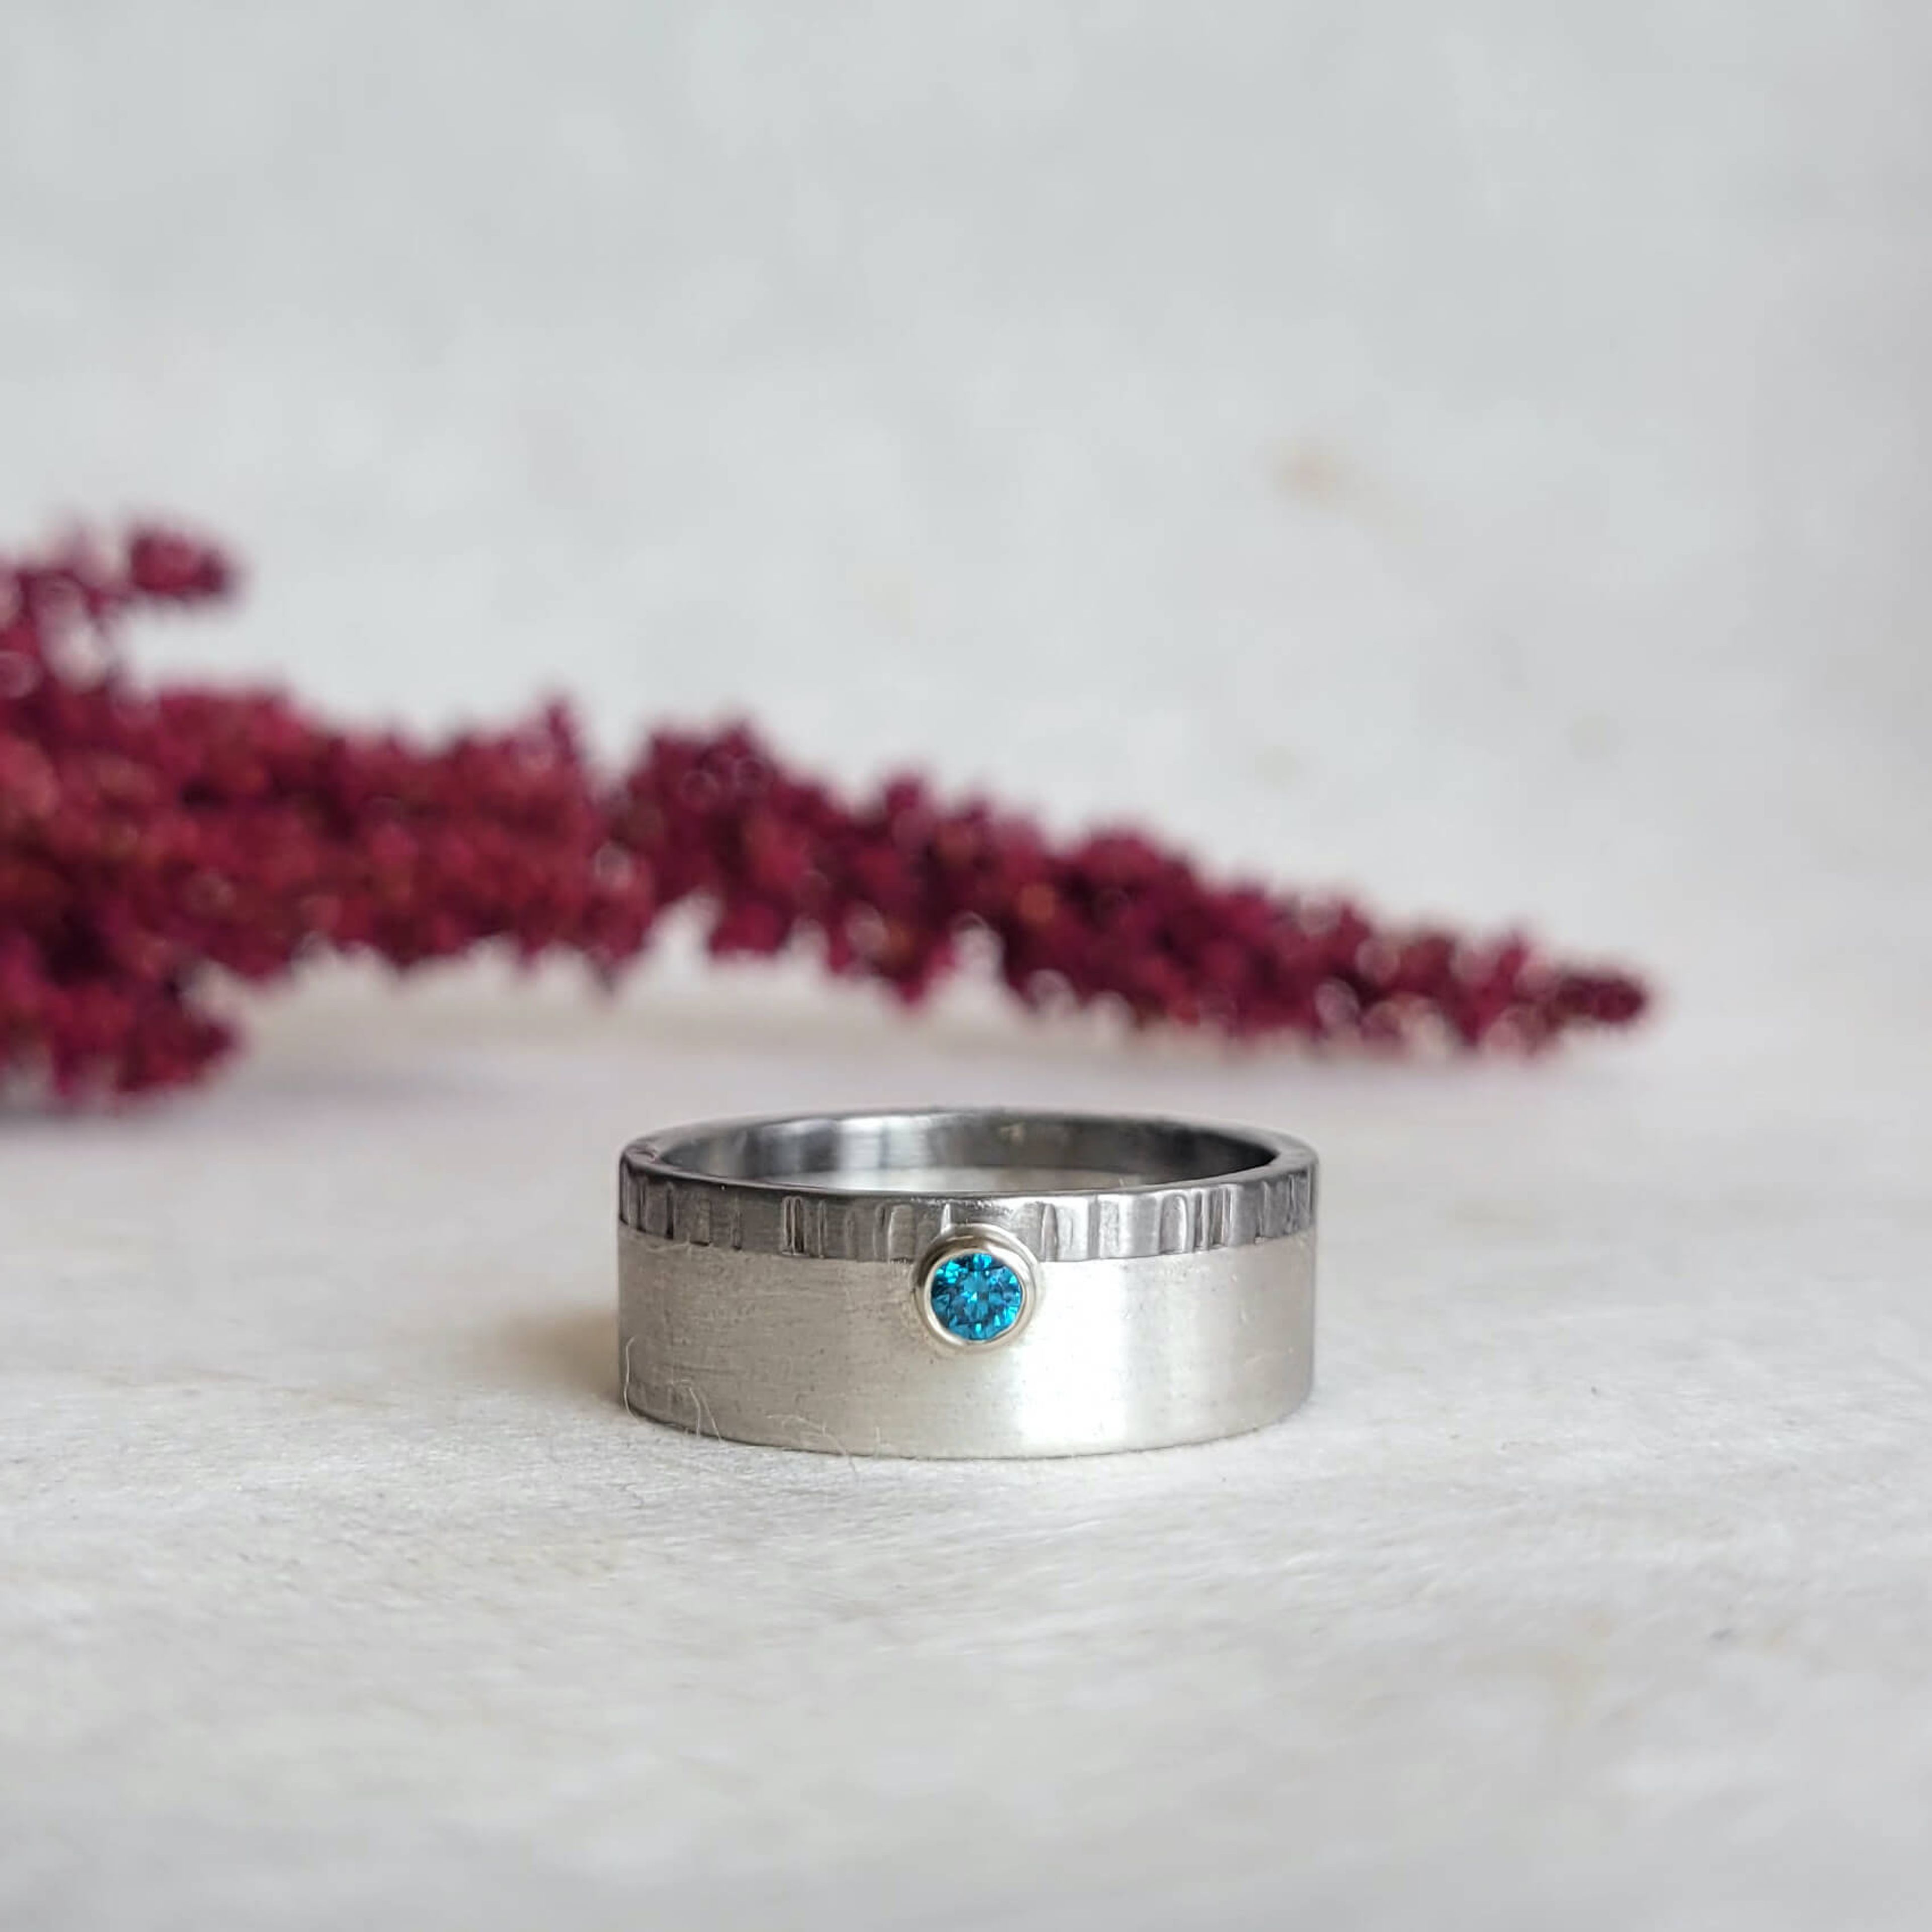 8mm Band in Hammered Palladium and Satin Sterling Silver with Blue Diamond Accent